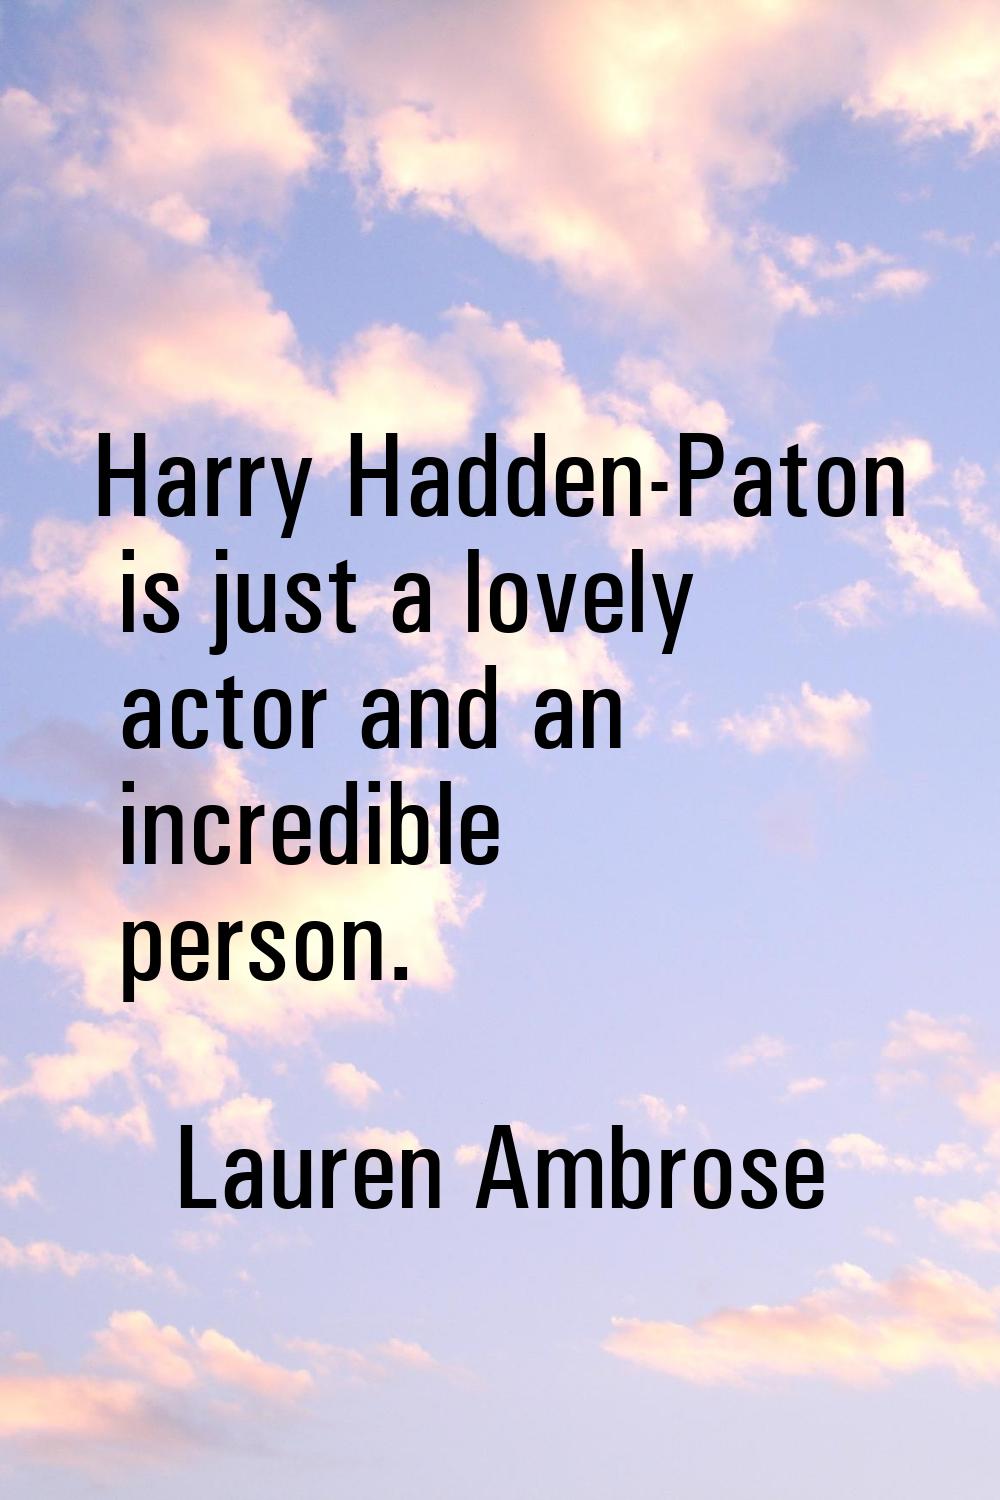 Harry Hadden-Paton is just a lovely actor and an incredible person.